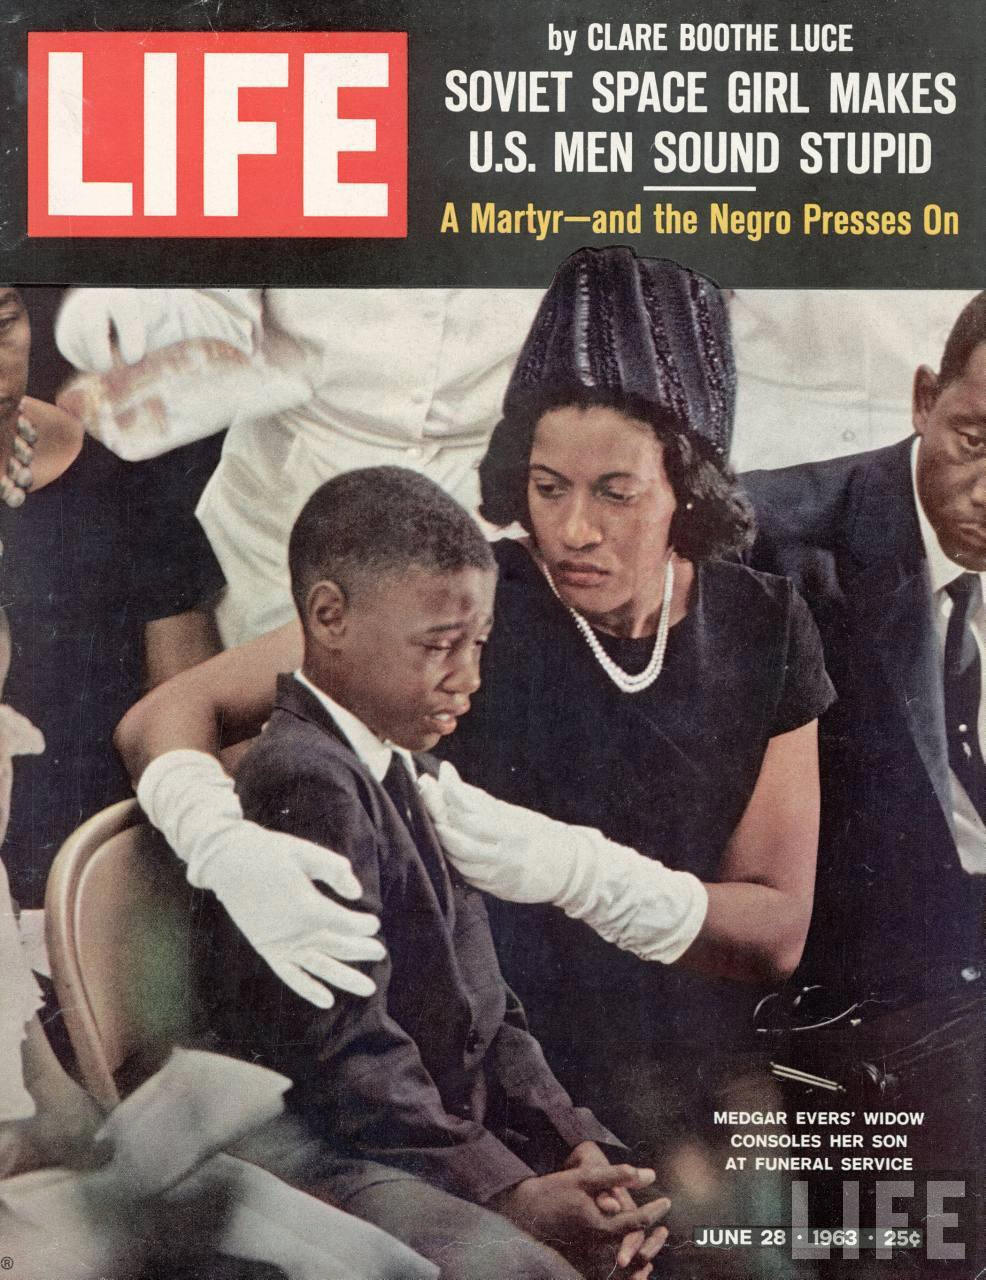 hist_us_20_civil_rights_evers_medgar_pic_widow_son_life_cover_28june1963